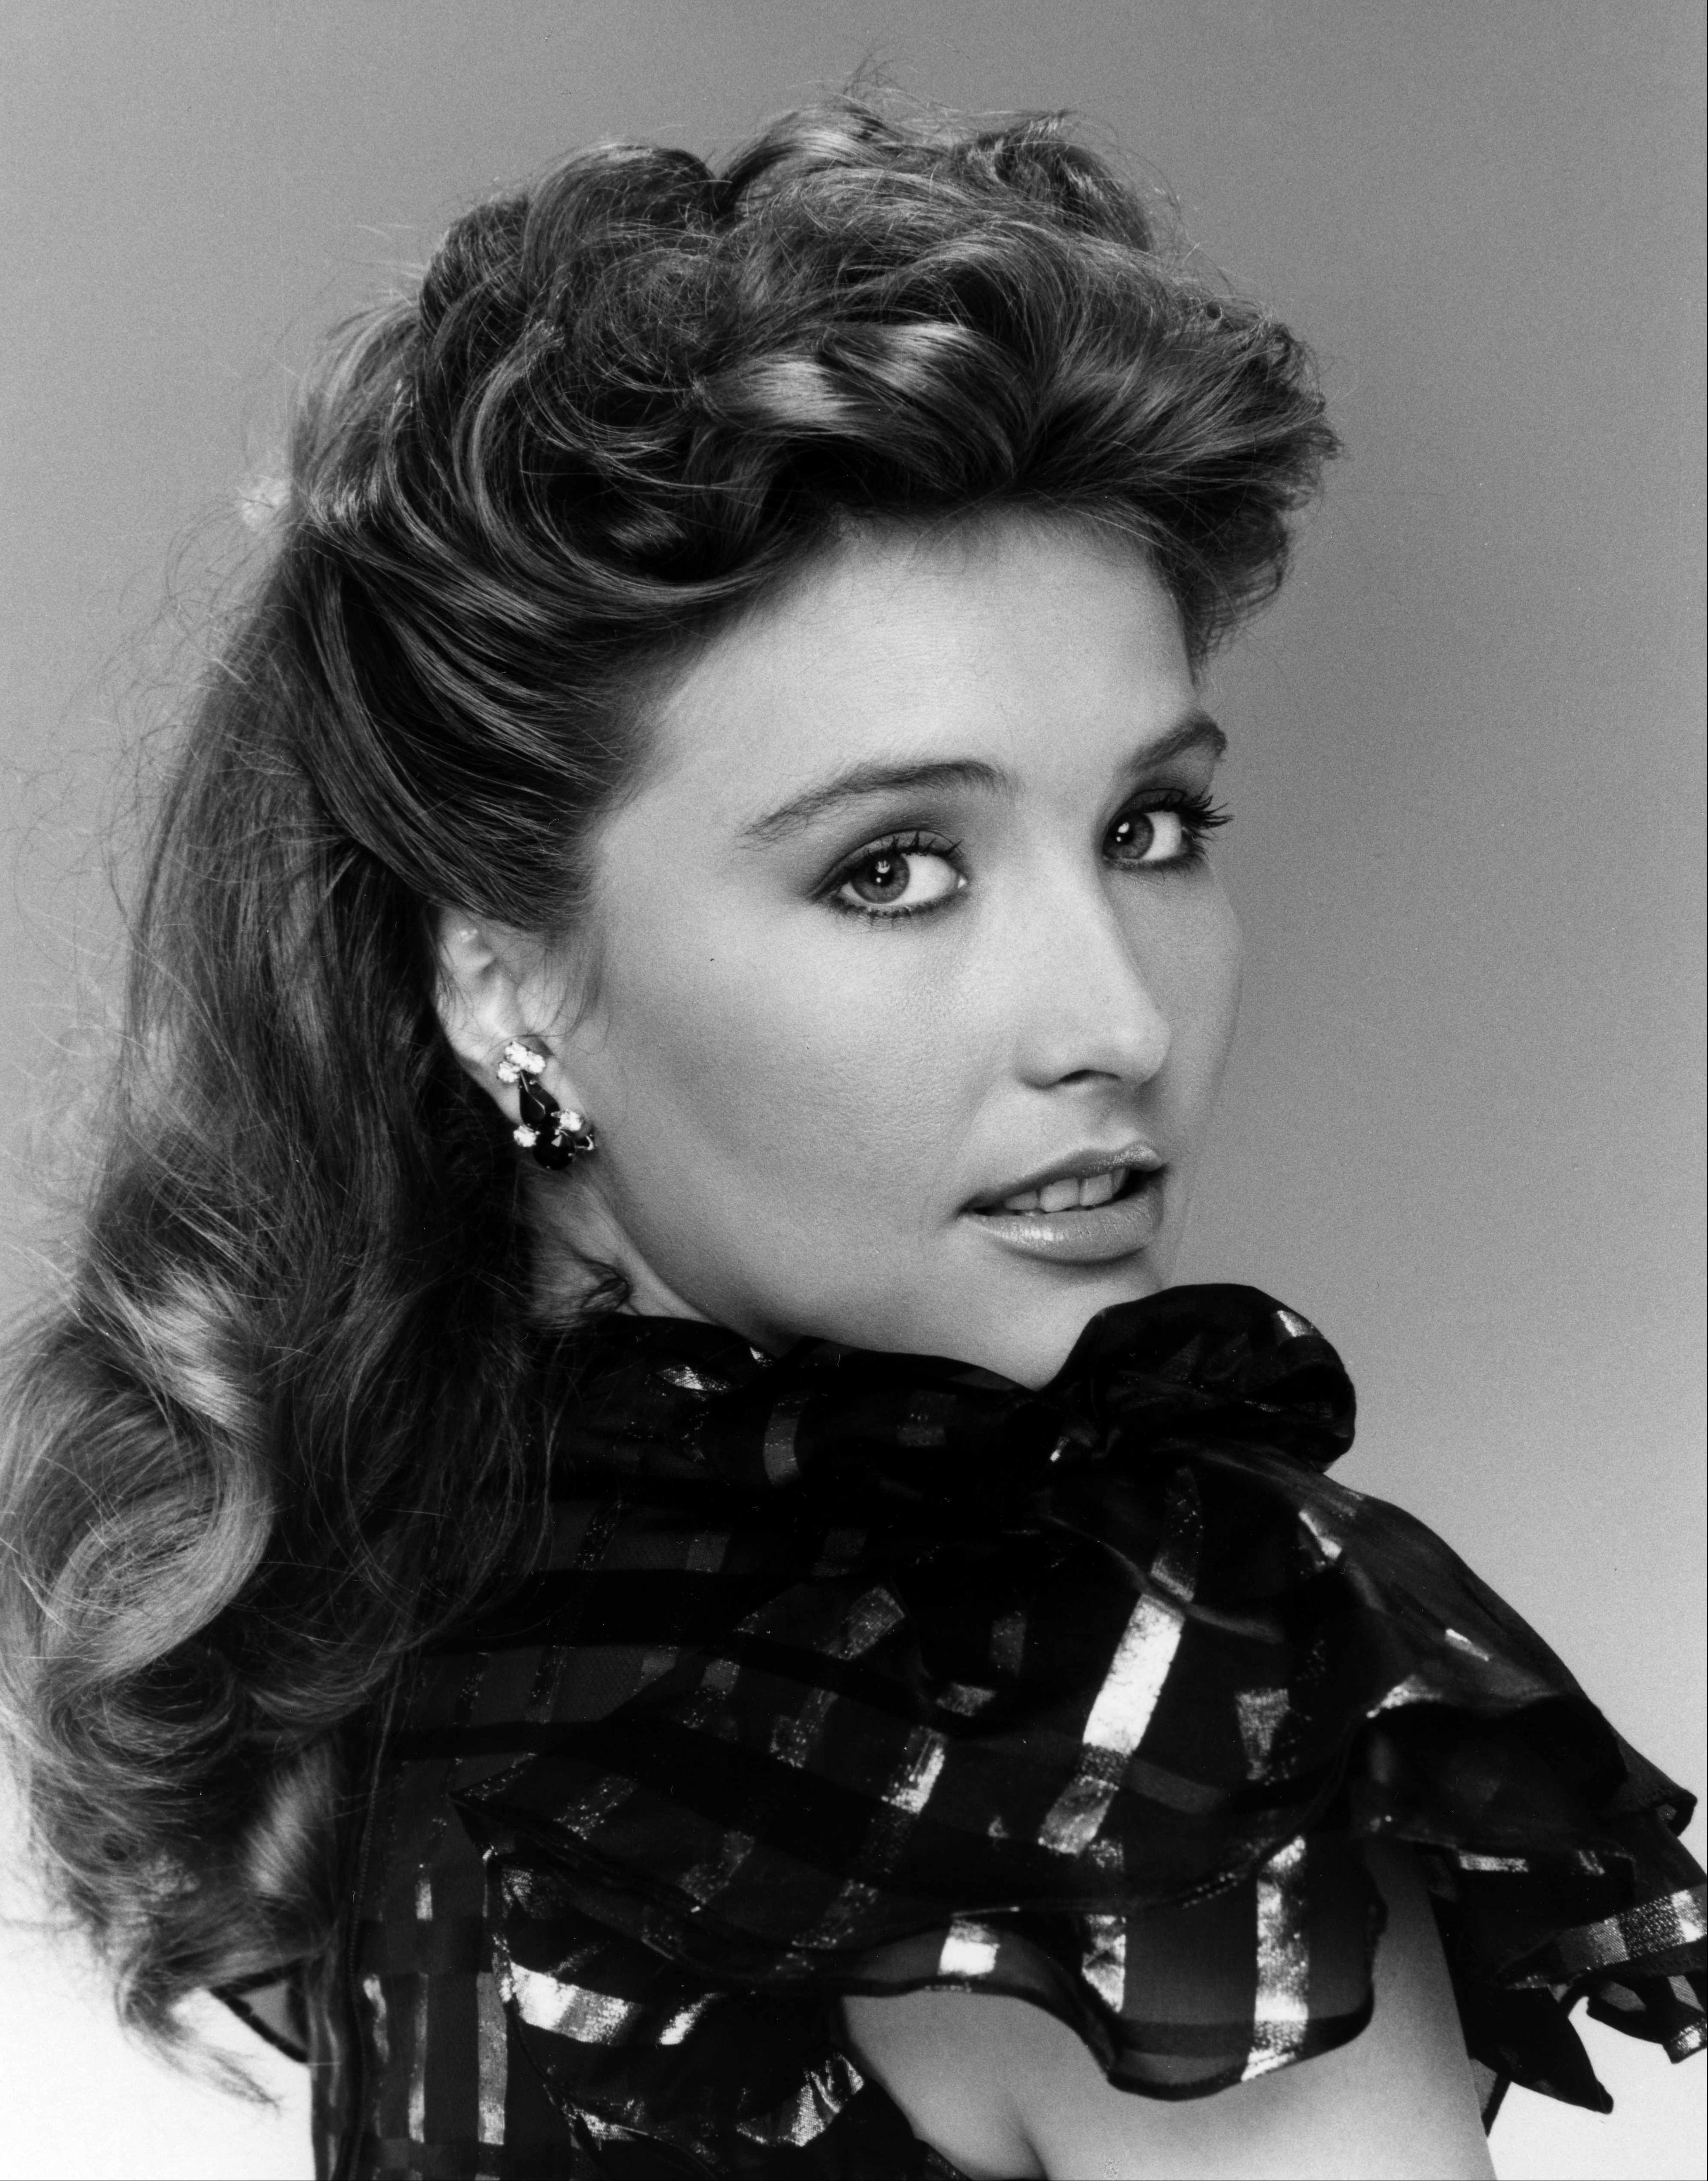 Robyn Bernard photographed for "General Hospital" in 1984 | Source: Getty Images